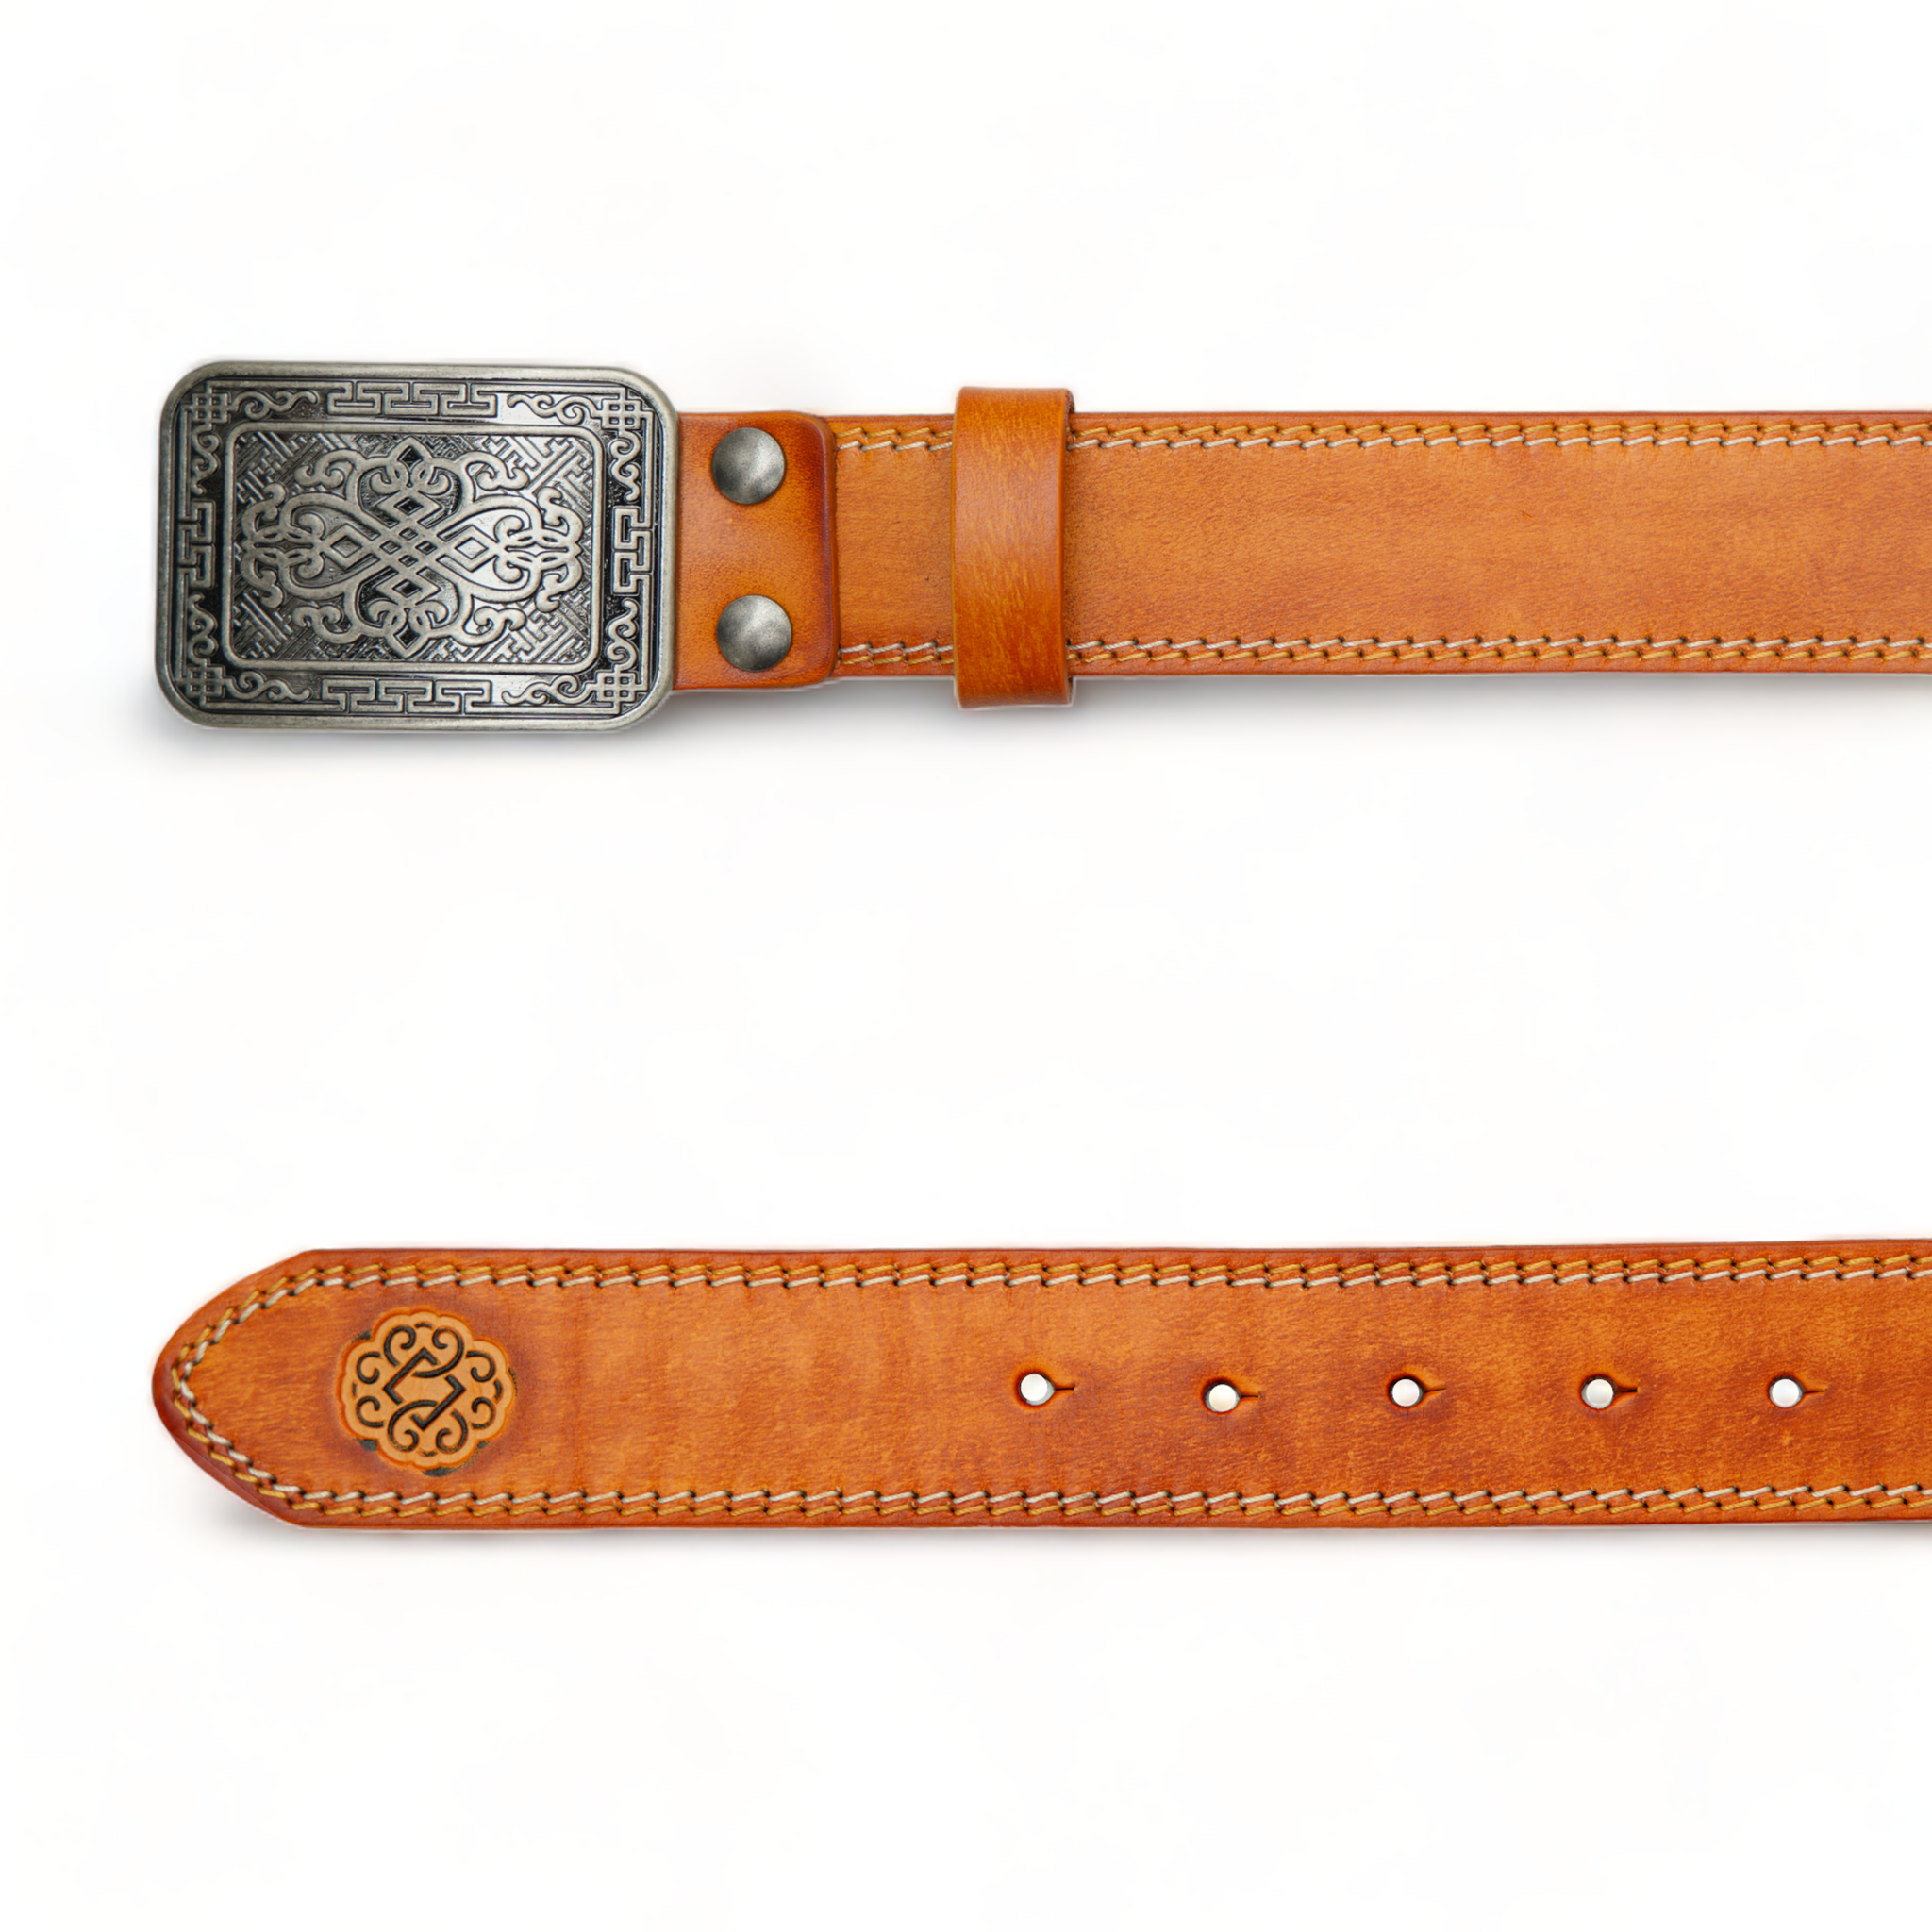 Chokore Embossed Pure Leather Belt with Stitching Details (Camel)